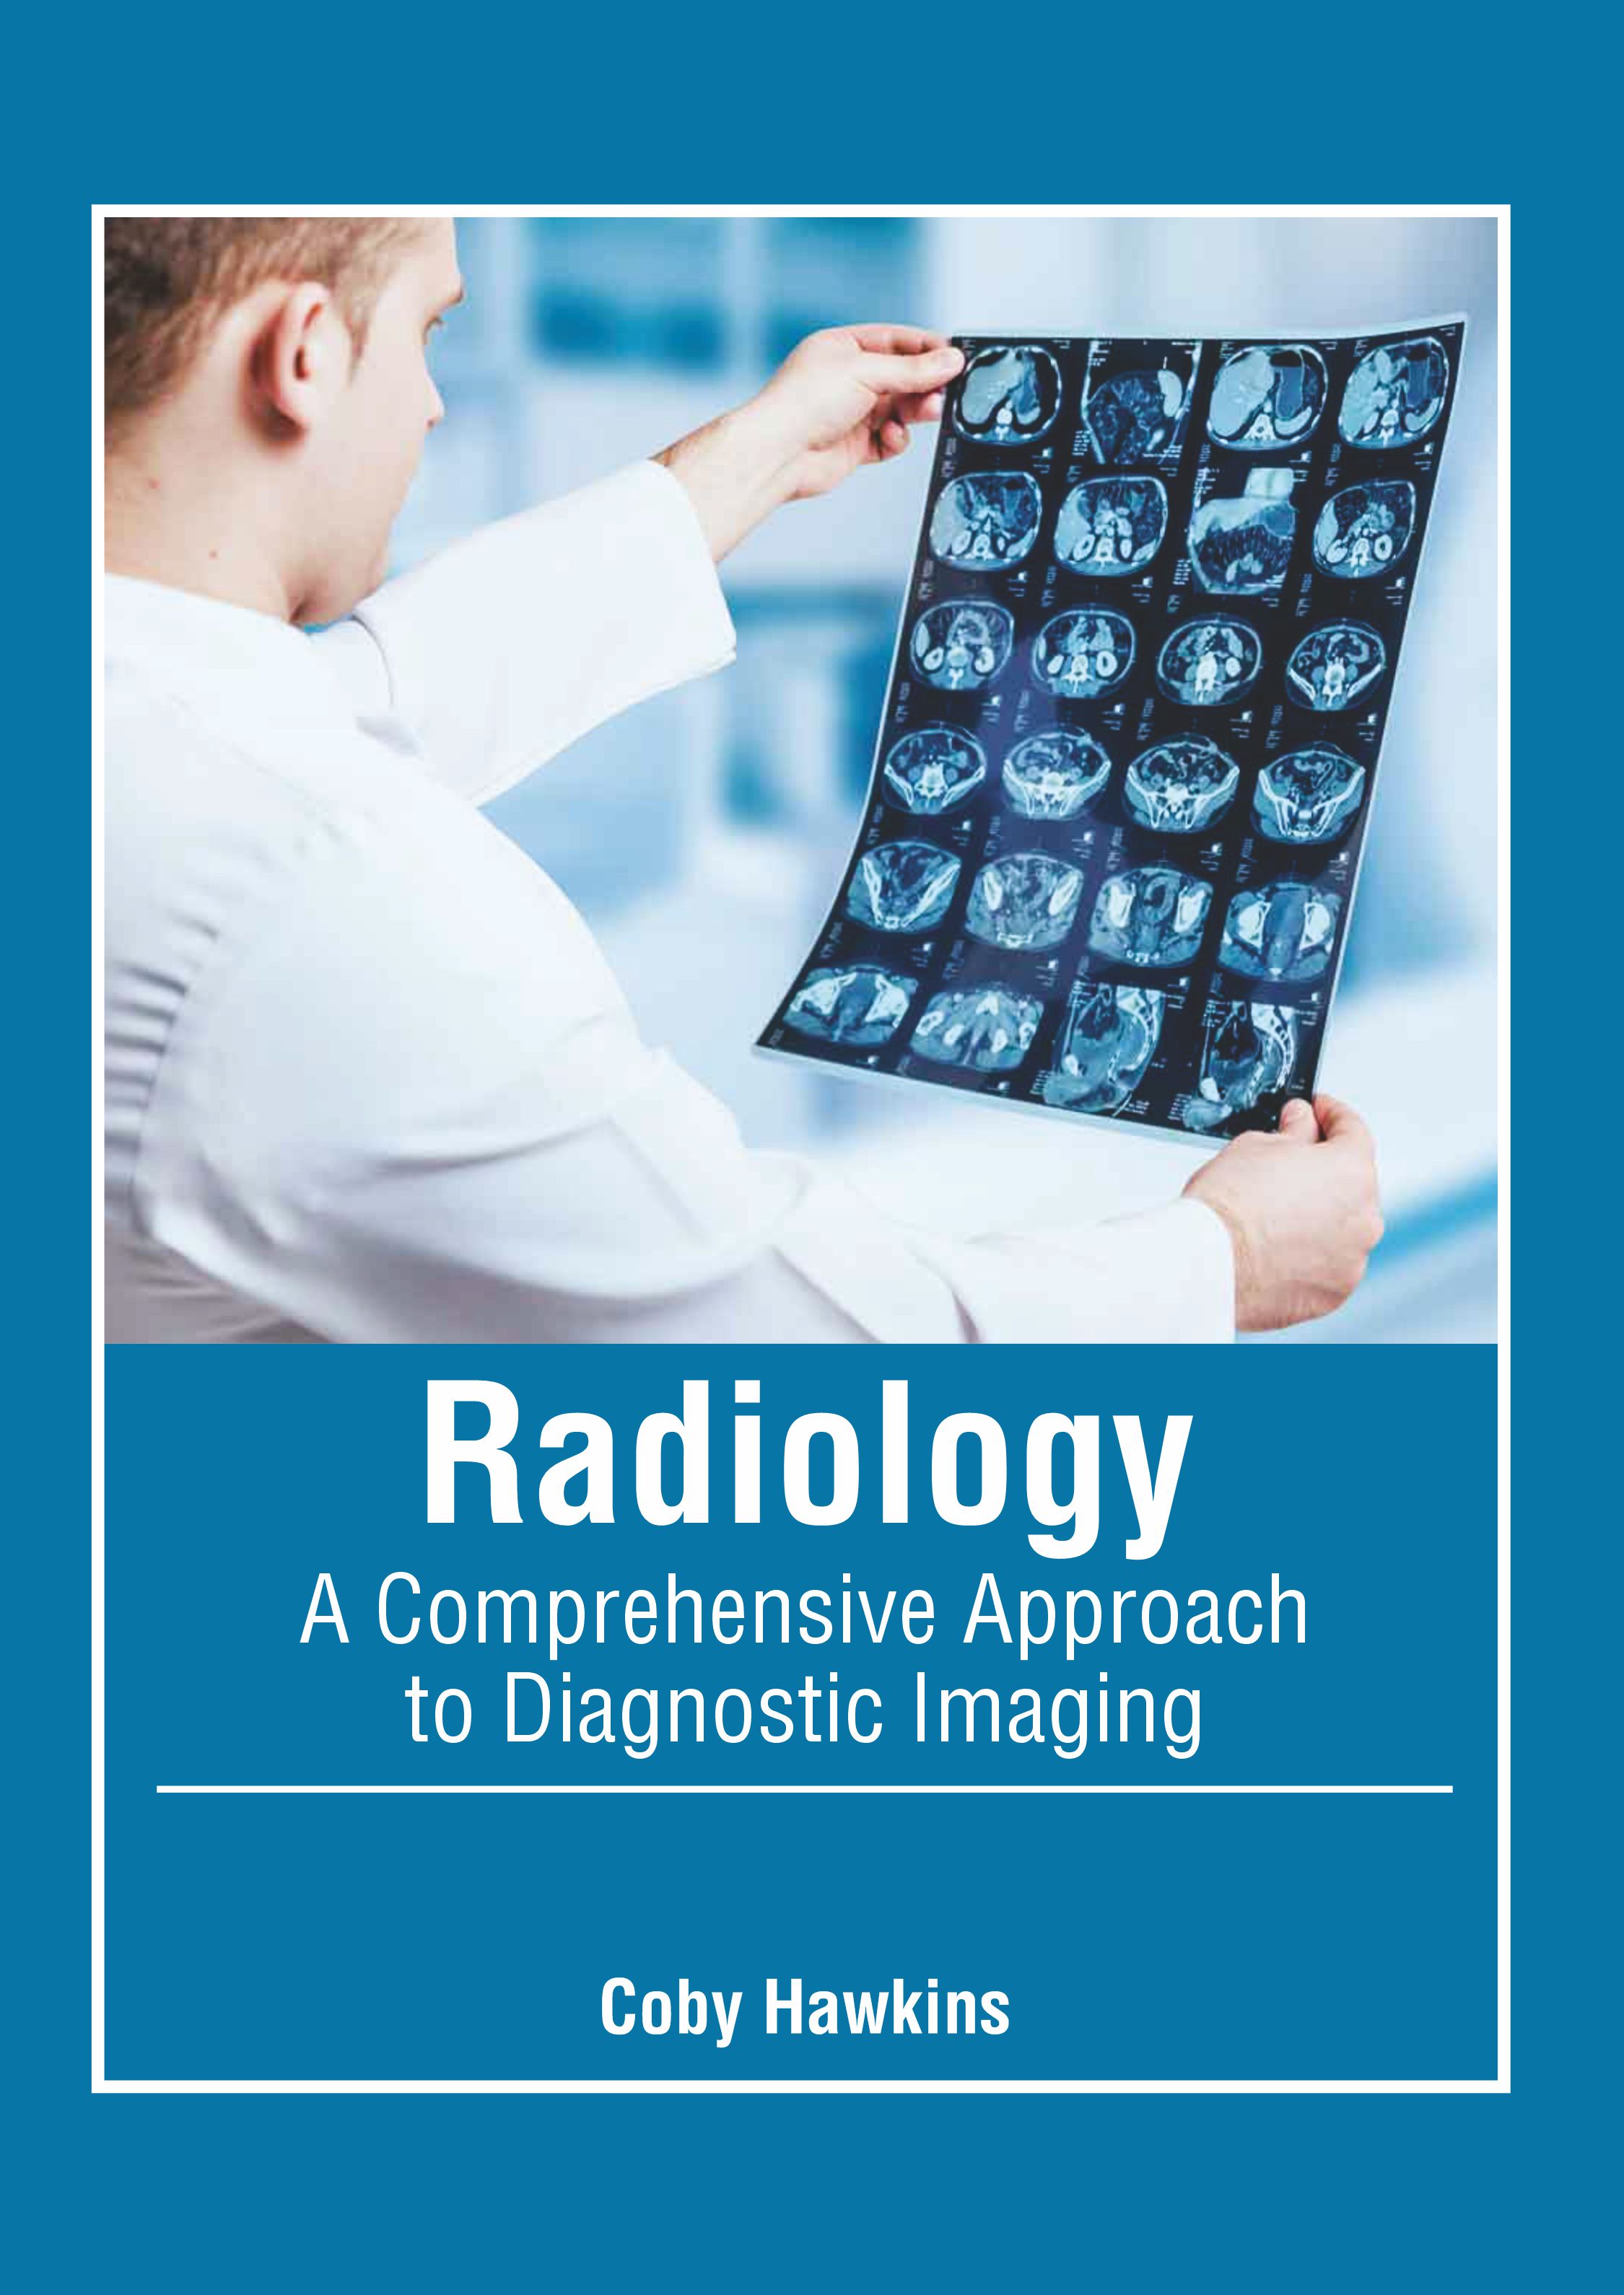 

medical-reference-books/radiology/radiology-a-comprehensive-approach-to-diagnostic-imaging-9781639270804